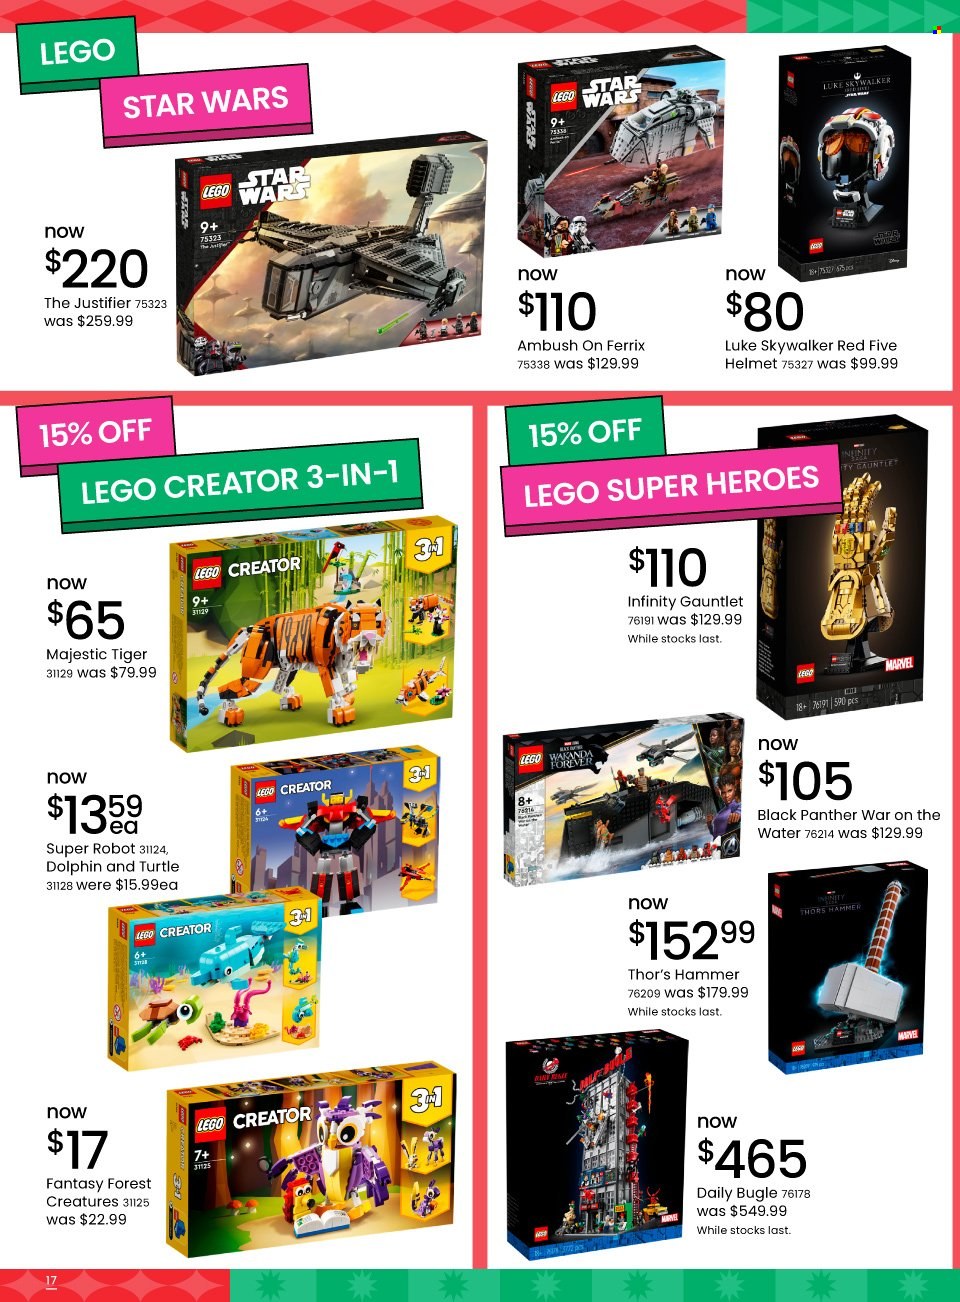 thumbnail - Myer Catalogue - 28 Nov 2022 - 24 Dec 2022 - Sales products - Infinity, hat, LEGO, LEGO Creator, LEGO Star Wars, robot, hammer, Super Heroes, LEGO Super Heroes. Page 17.